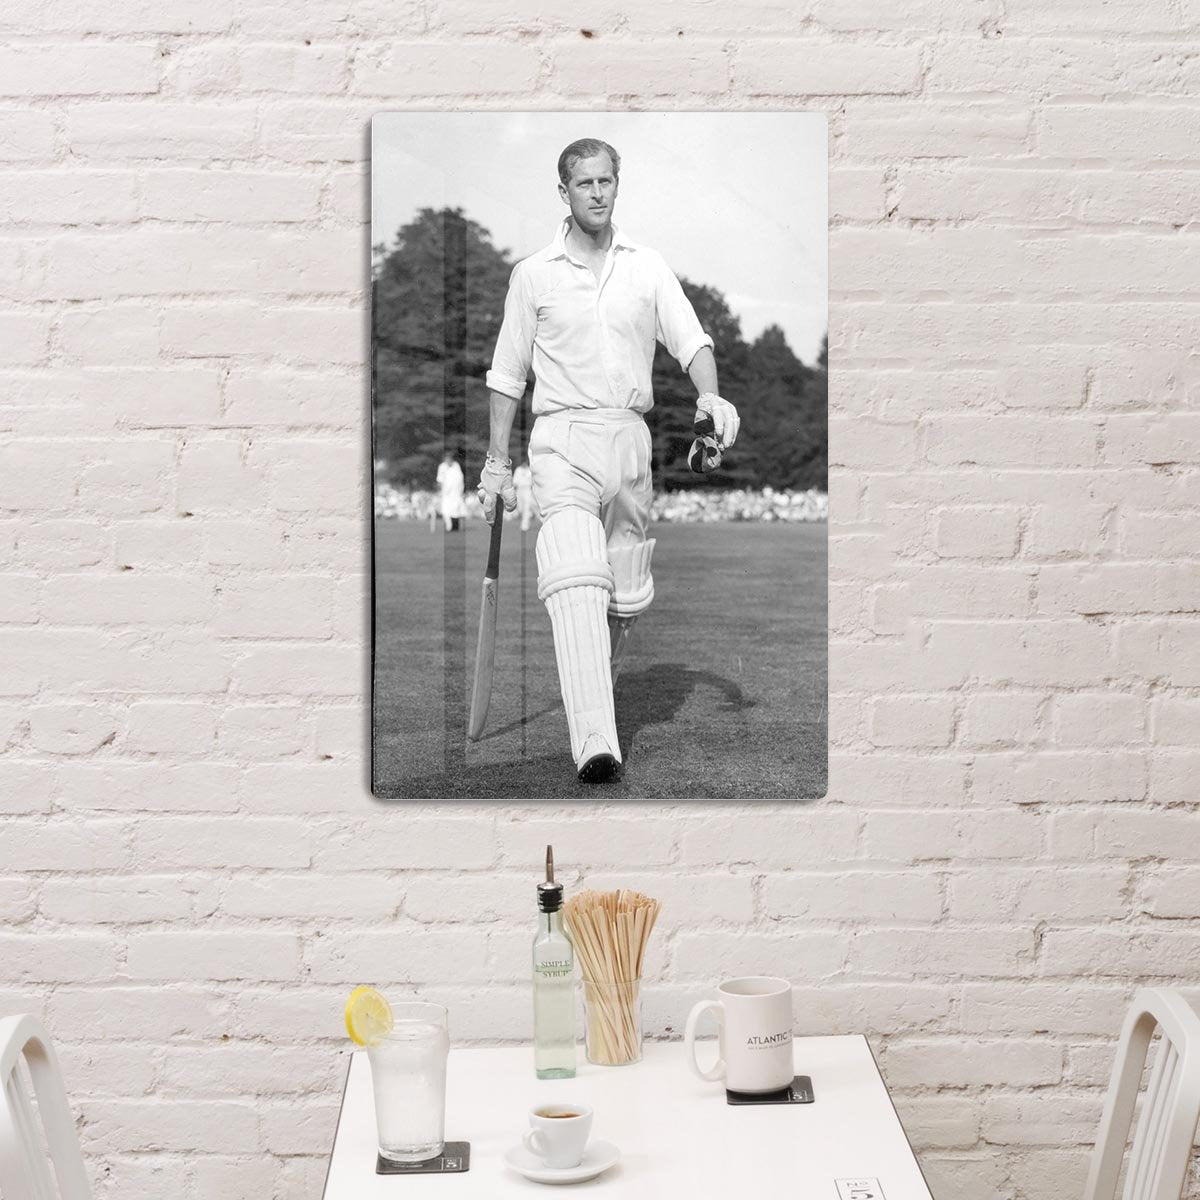 Prince Philip as cricket captain in a charity match HD Metal Print